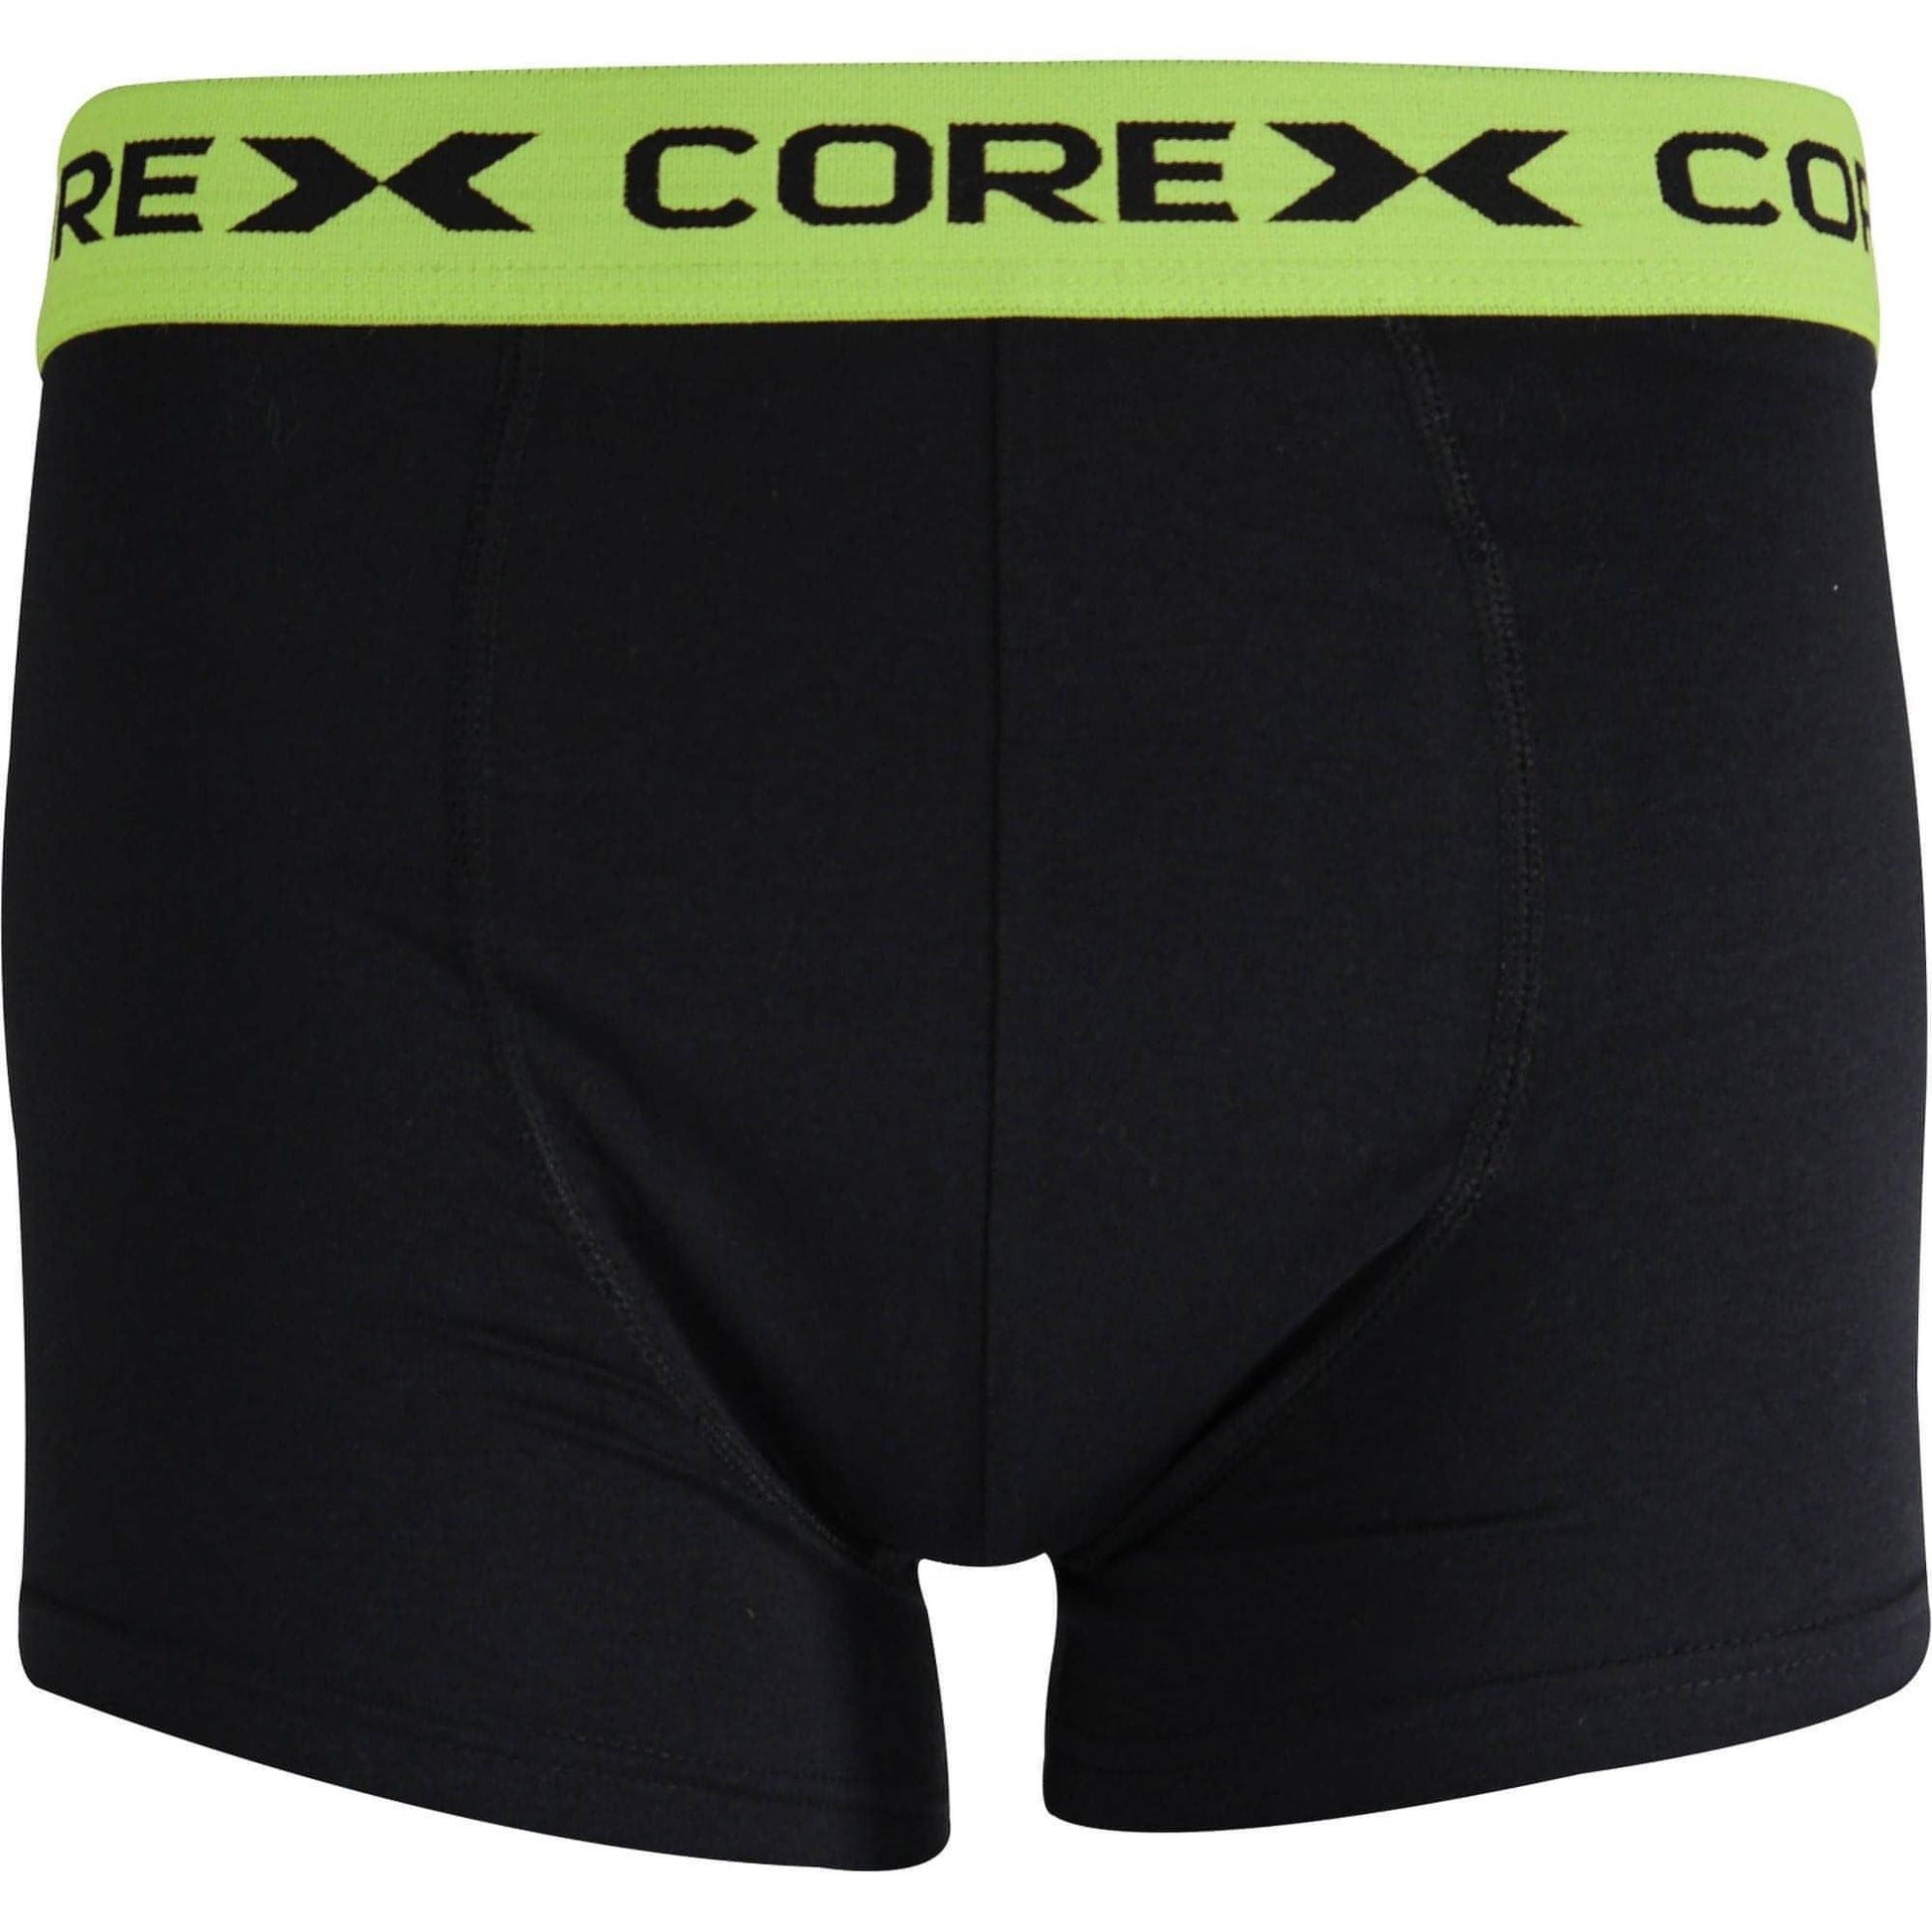 Corex Fitness Classic Pack Boxers 1P204921Wm Greenorange Green Front - Front View